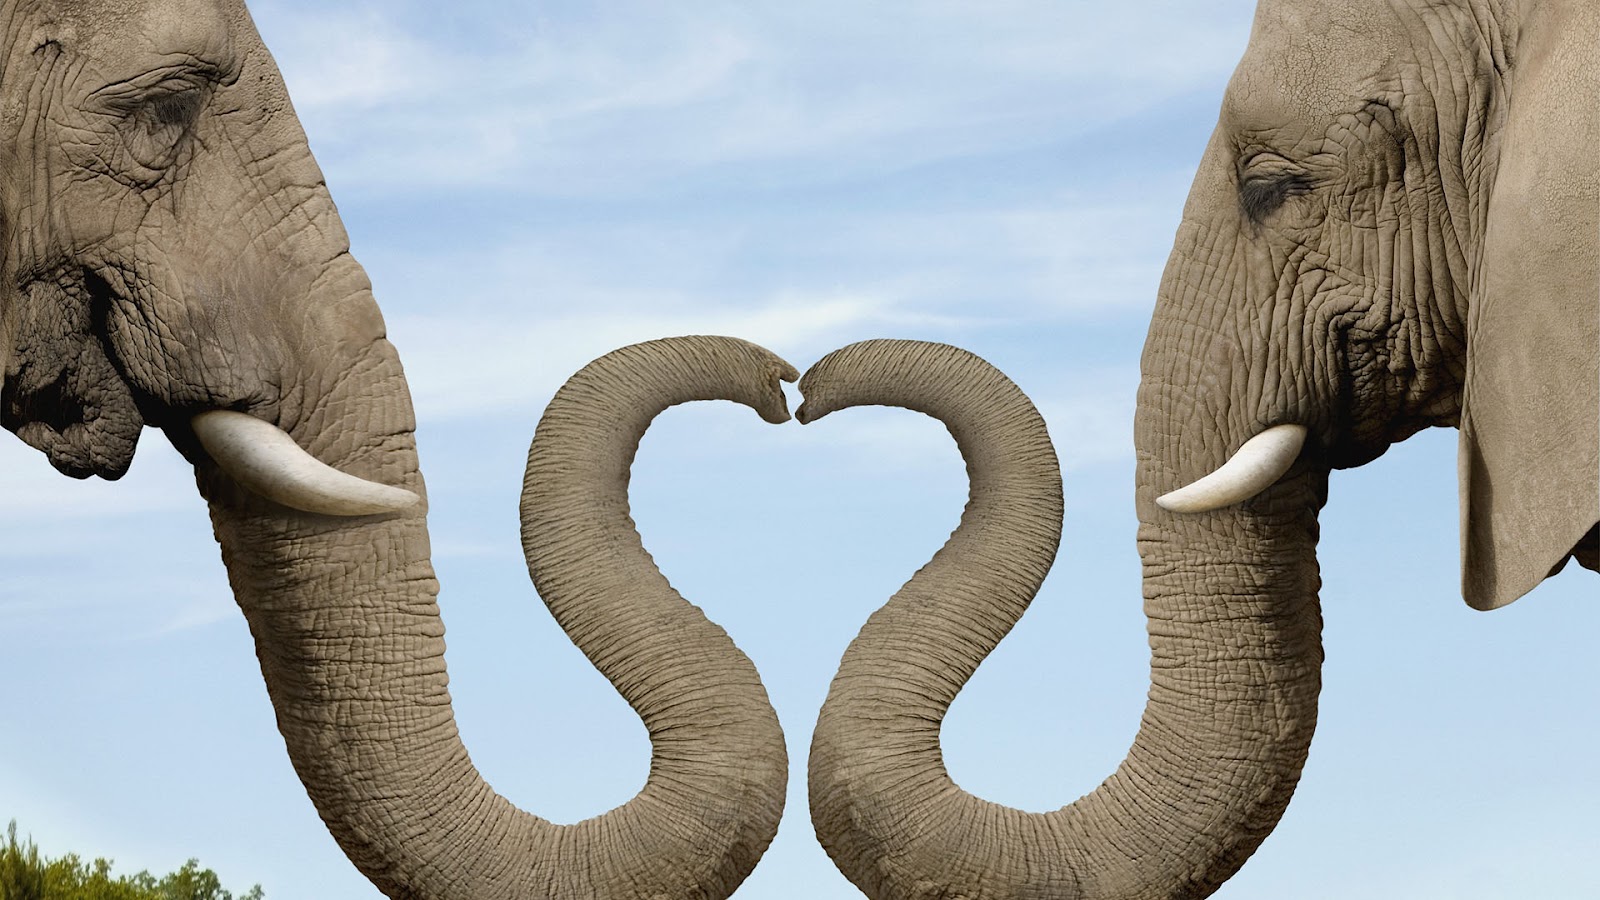 Elephant Animal Make Amazing Love Symbol Hd Wallpapers - Elephants Making A Heart With Their Trunks - HD Wallpaper 